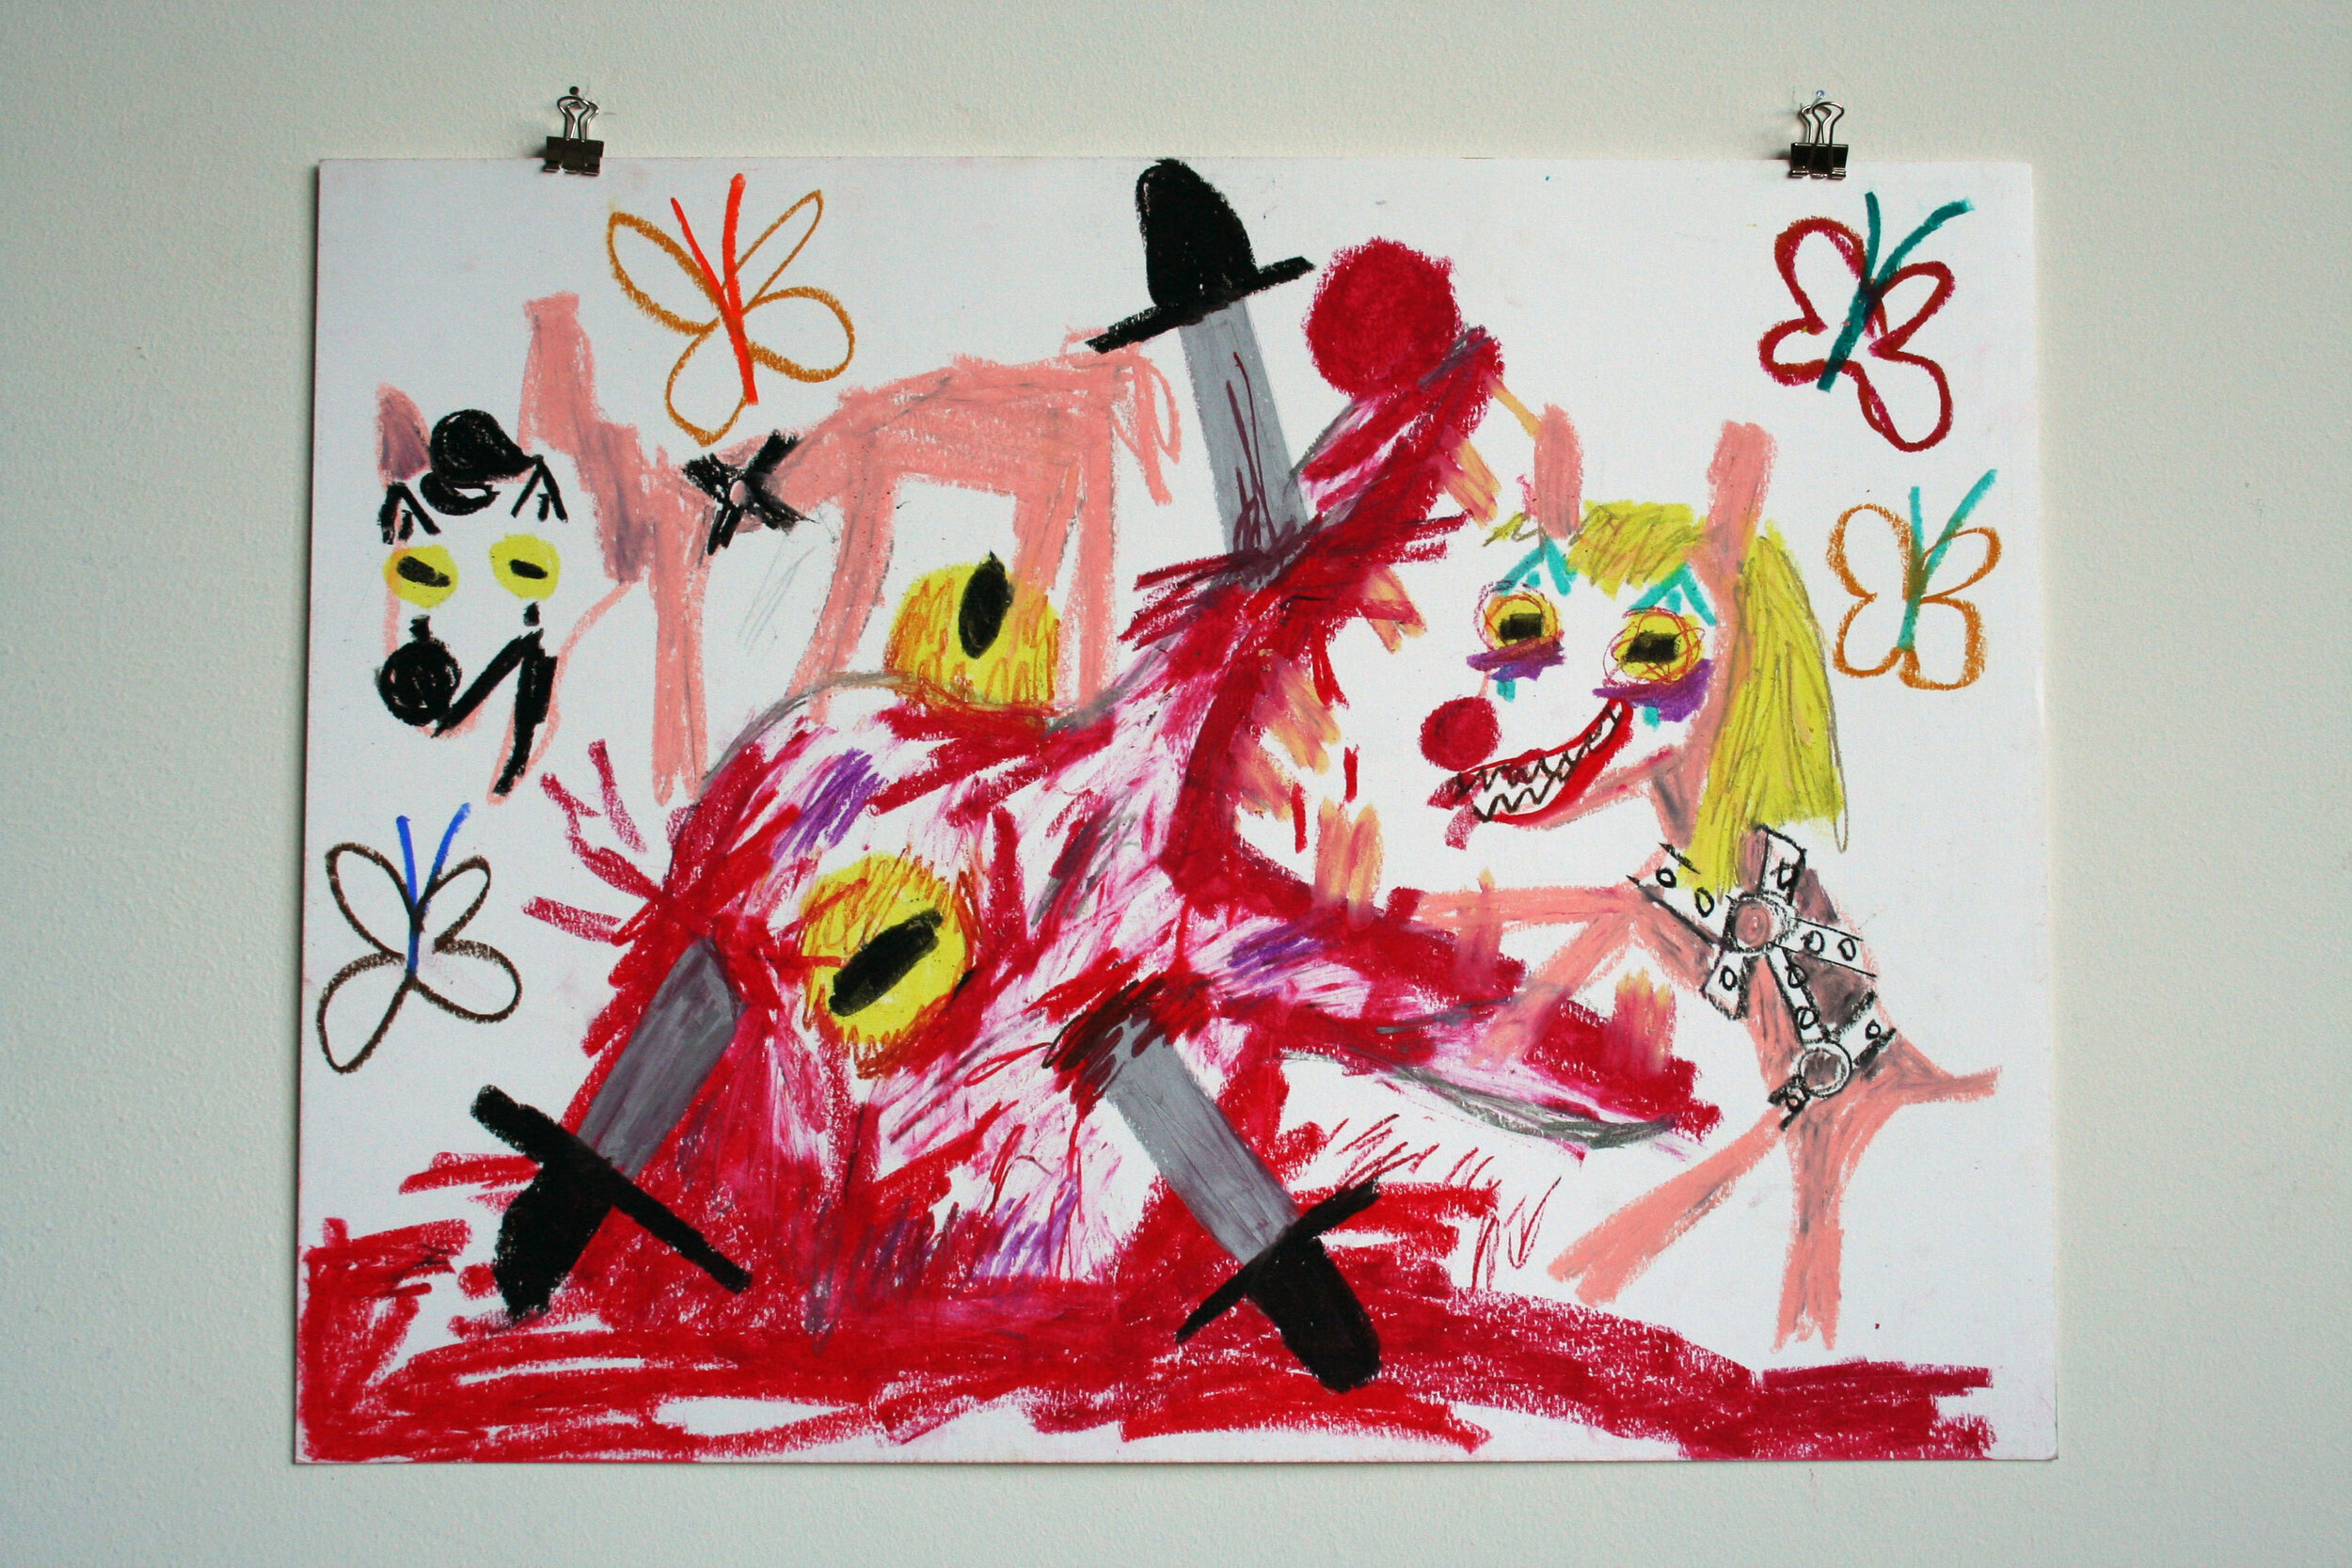   Bloody Hell,  2014  18 x 24 inches (45.72 x 60.96 cm.)  Oil pastel on paper 